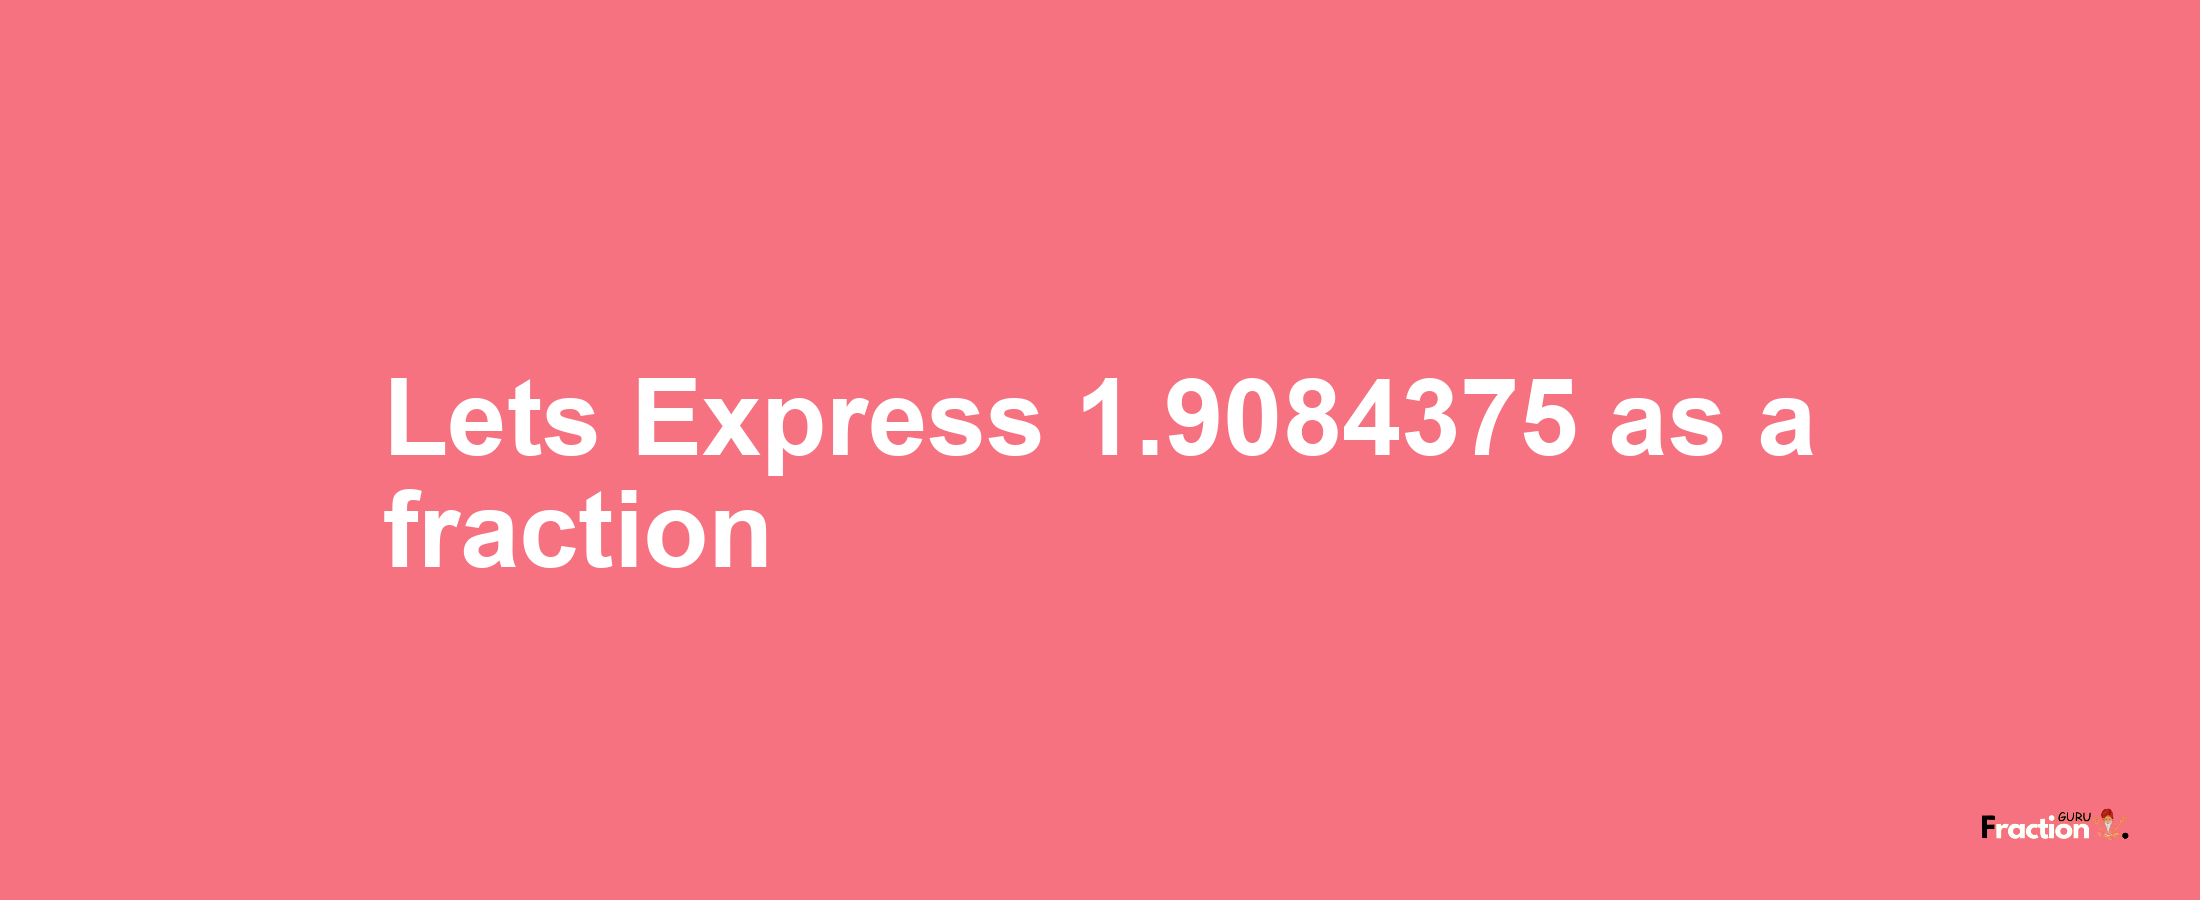 Lets Express 1.9084375 as afraction